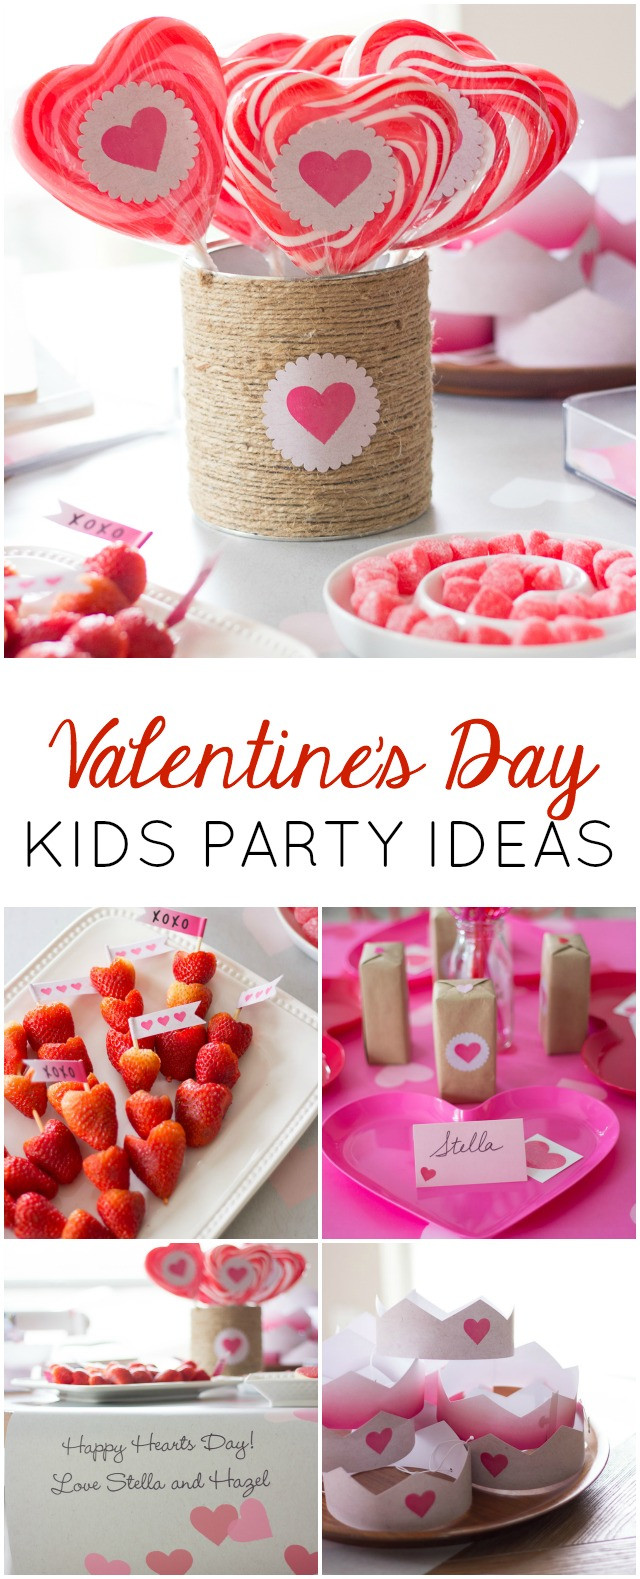 Valentines Birthday Gift Ideas
 A Heart Filled Valentines Party